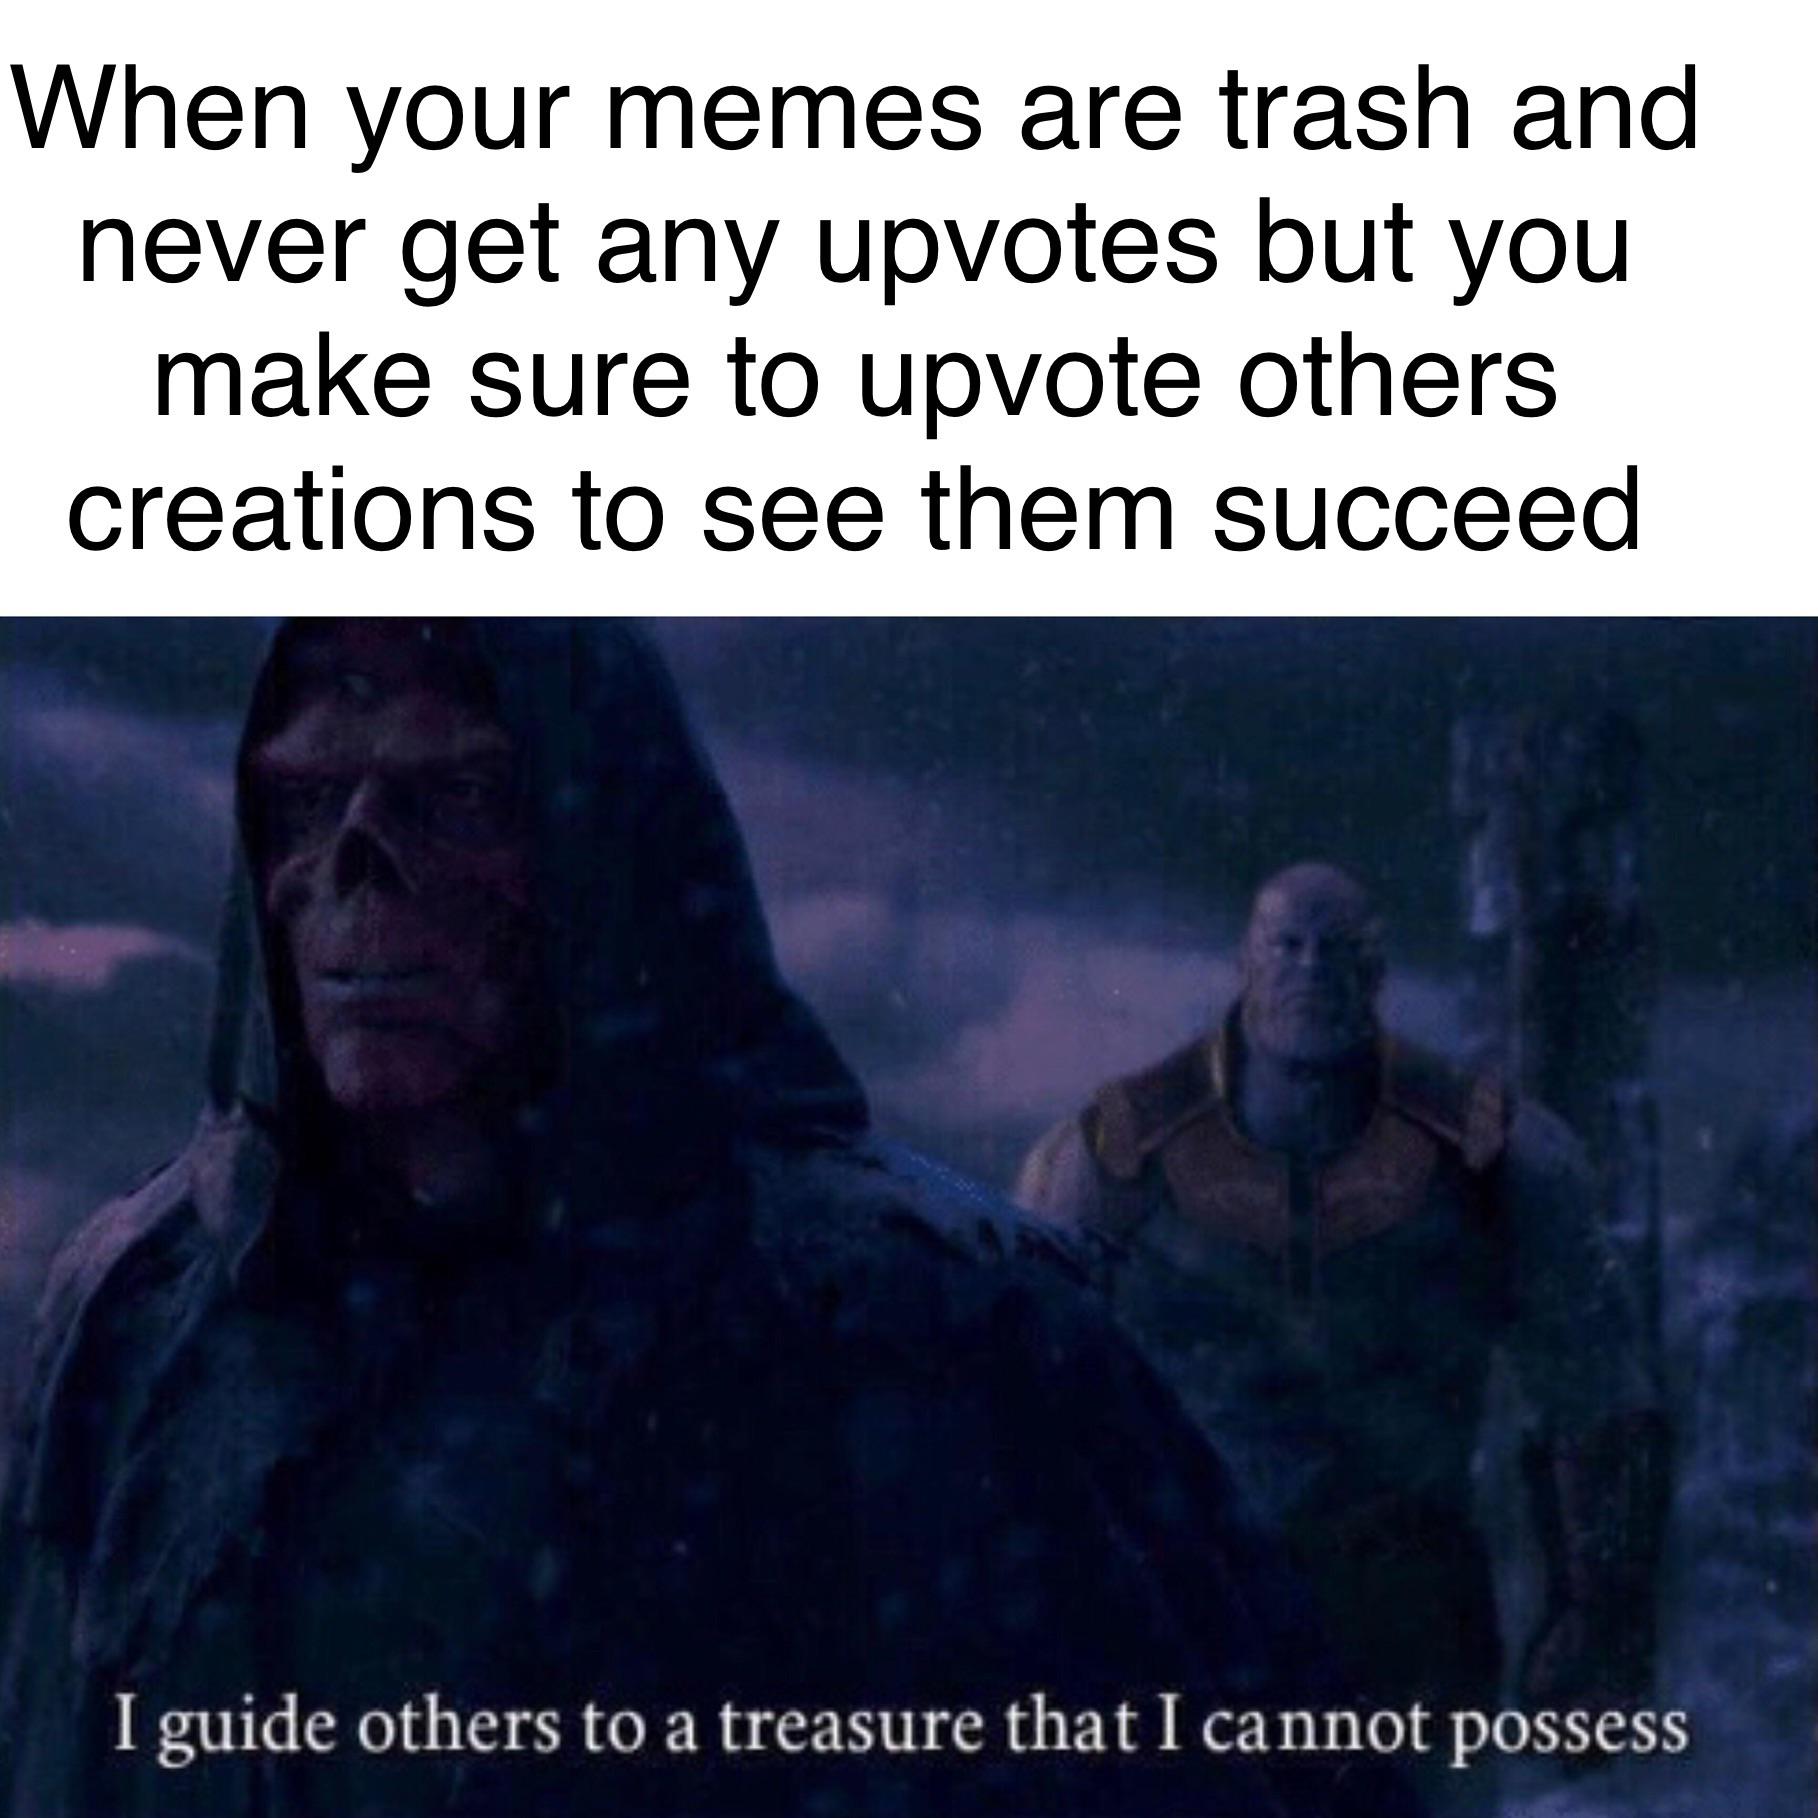 thanos avengers-memes thanos text: When your memes are trash and never get any upvotes but you make sure to upvote others creations to see succeed I guide others to a treasure that I cannot possess 